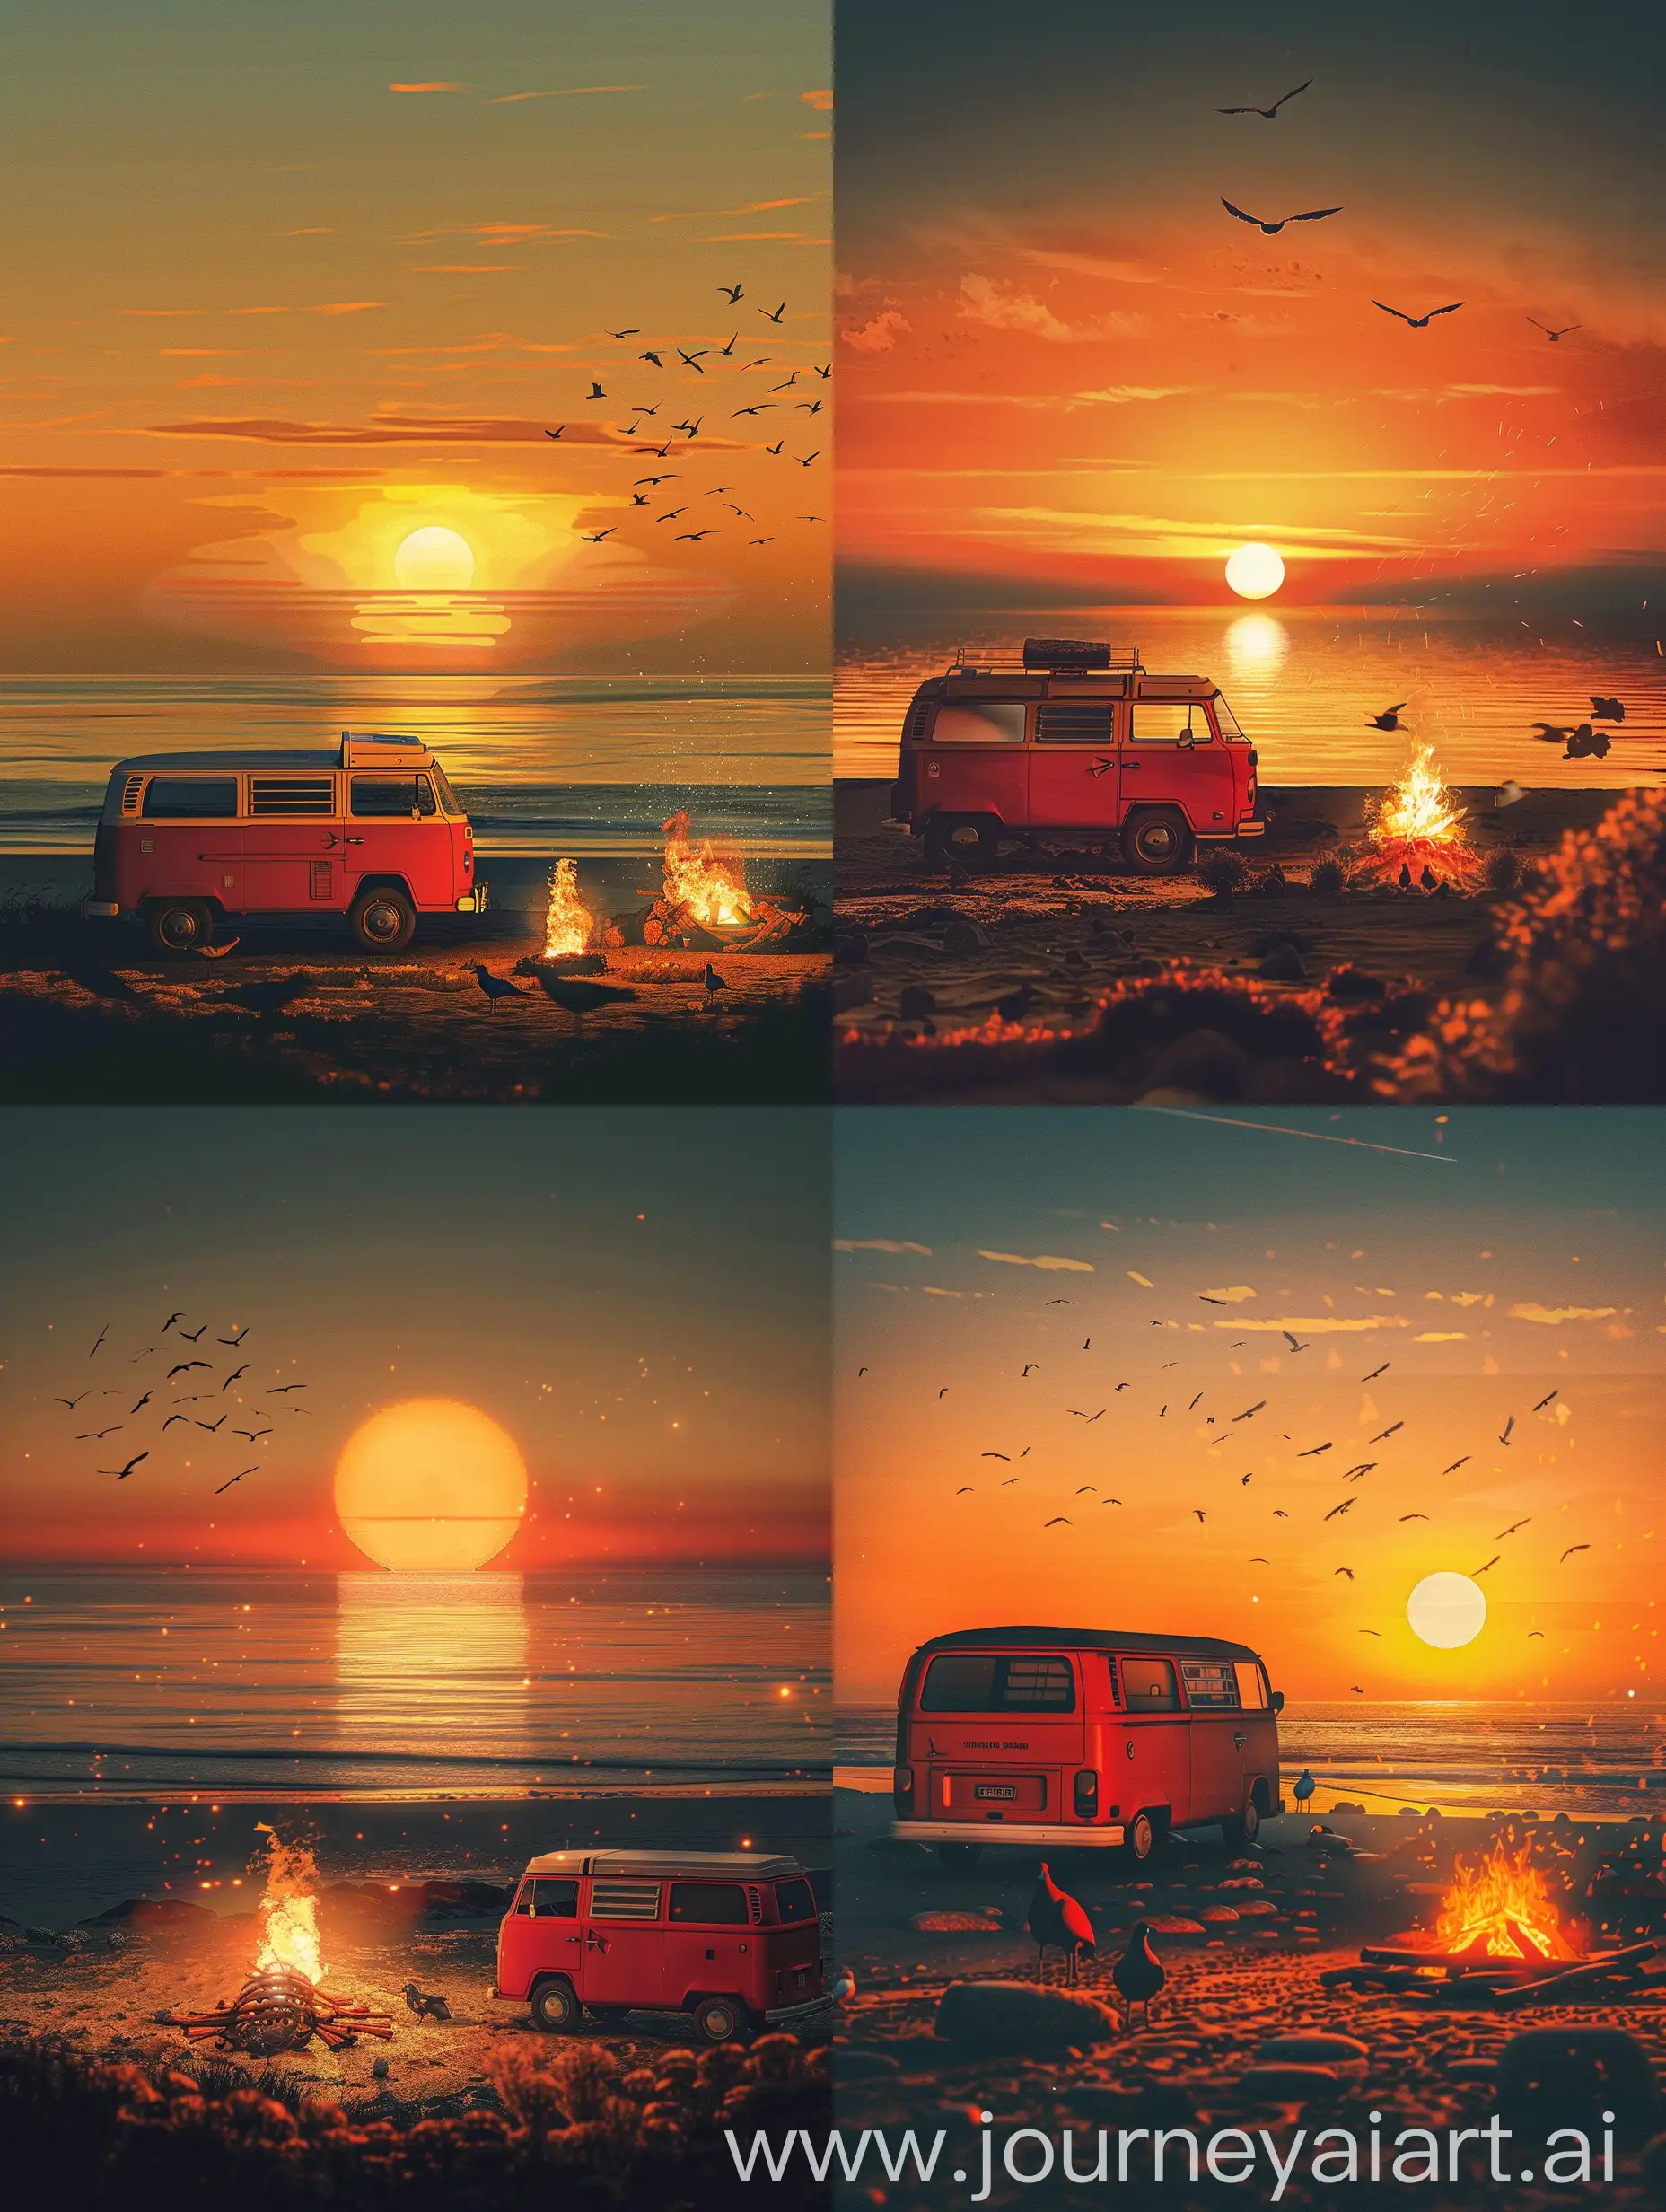 A serene and picturesque evening at a beach with a red vintage van parked near a roaring bonfire. The sun is setting, casting an orange sky, Night sky,Silhouettes of birds are seen against the backdrop of the sun,Visual art, Digital art illustration